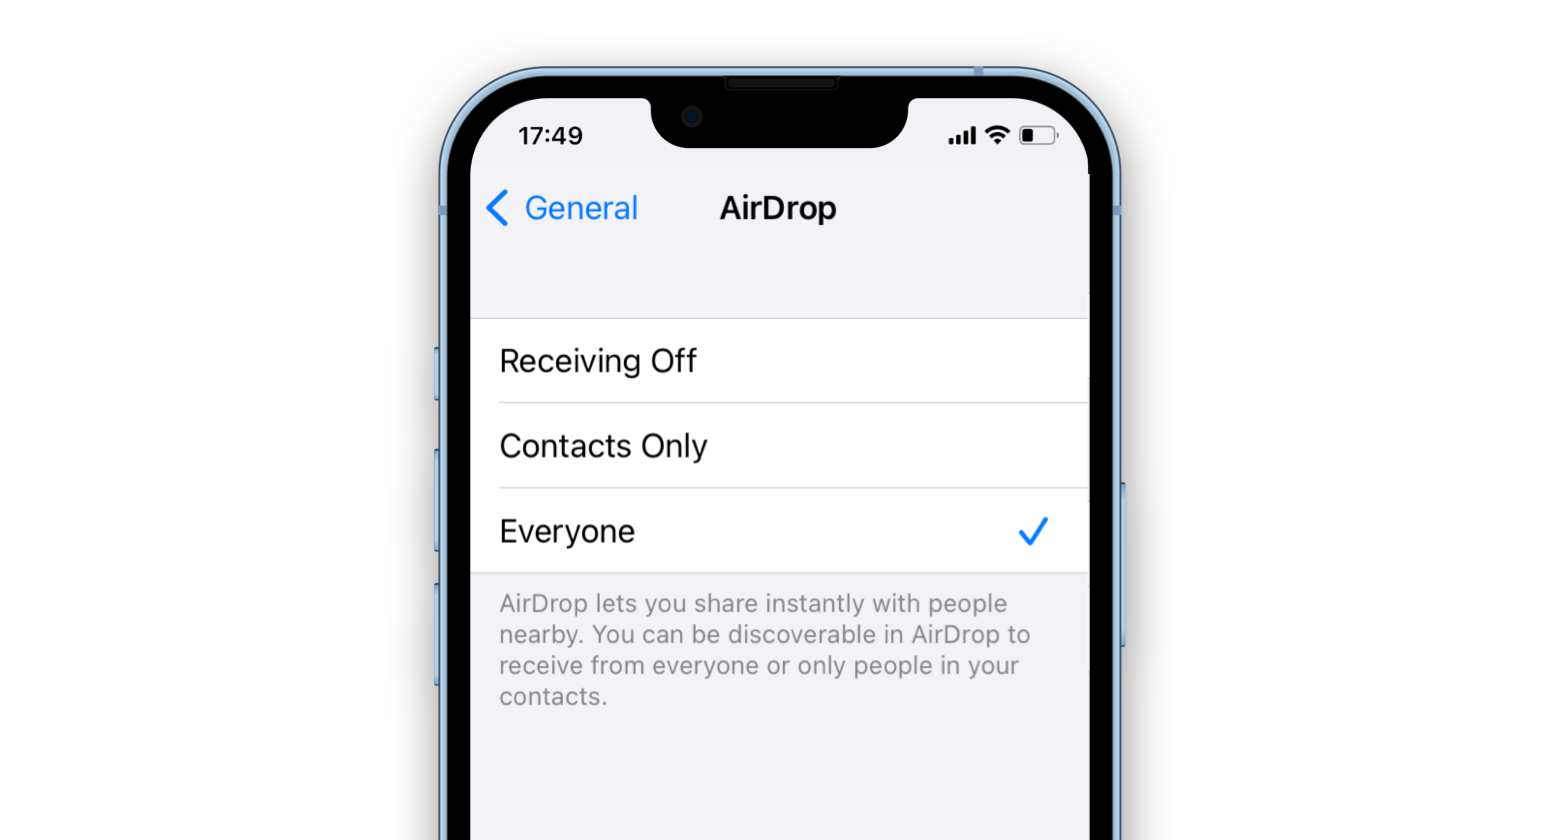 AirDrop video from iPhone